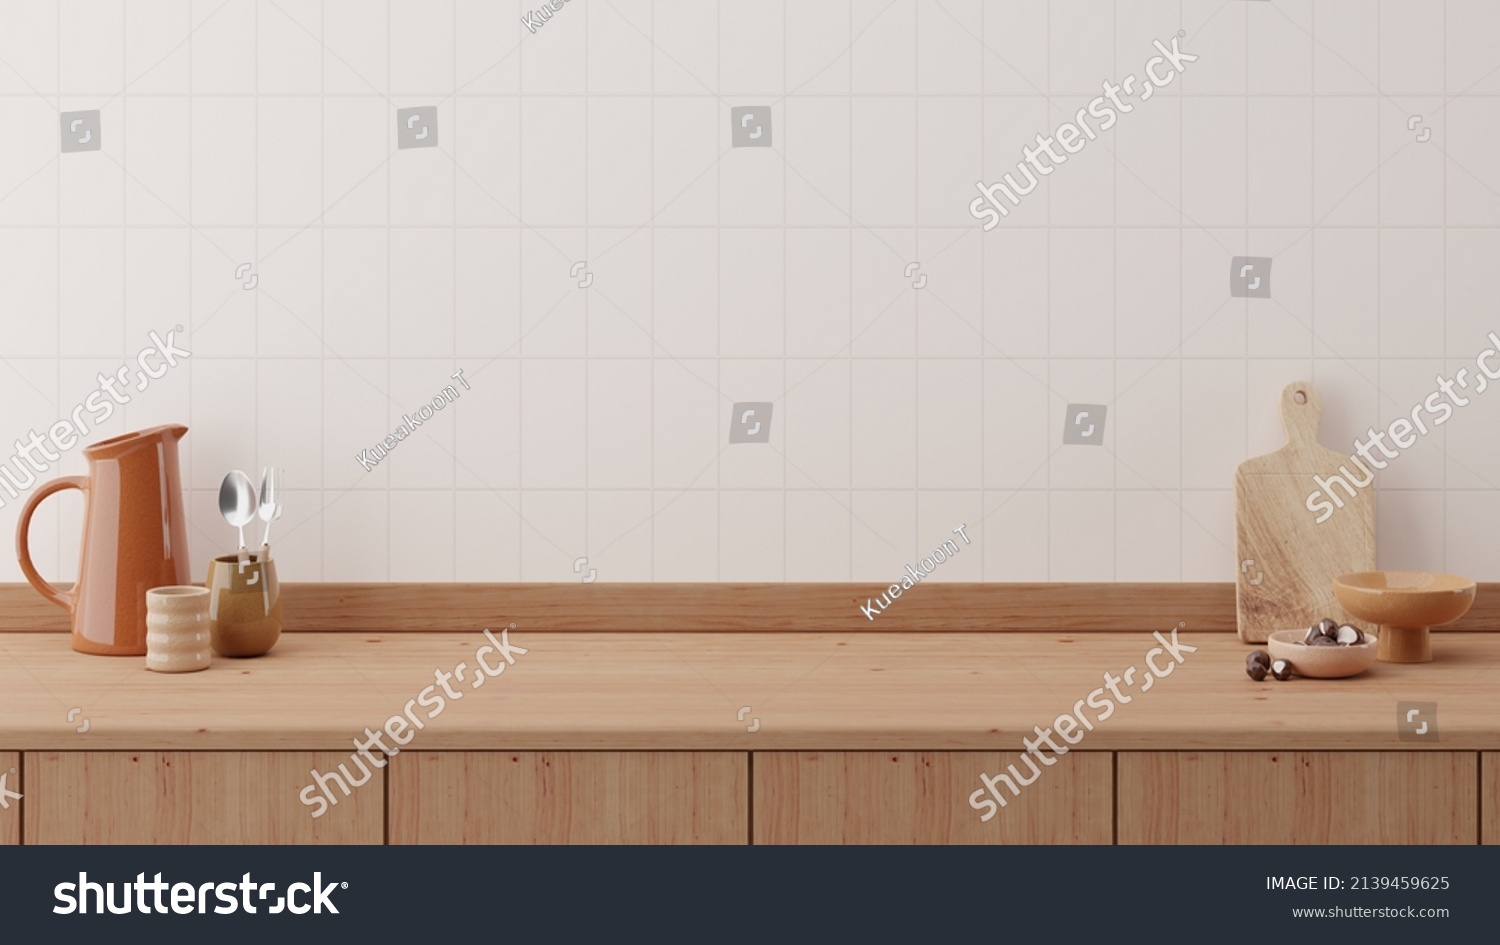 Minimal cozy counter mockup design for product presentation background or branding with bright wood counter  tile white wall with orange brown jug mug chop fork spoon bowl. Kitchen interior  #2139459625